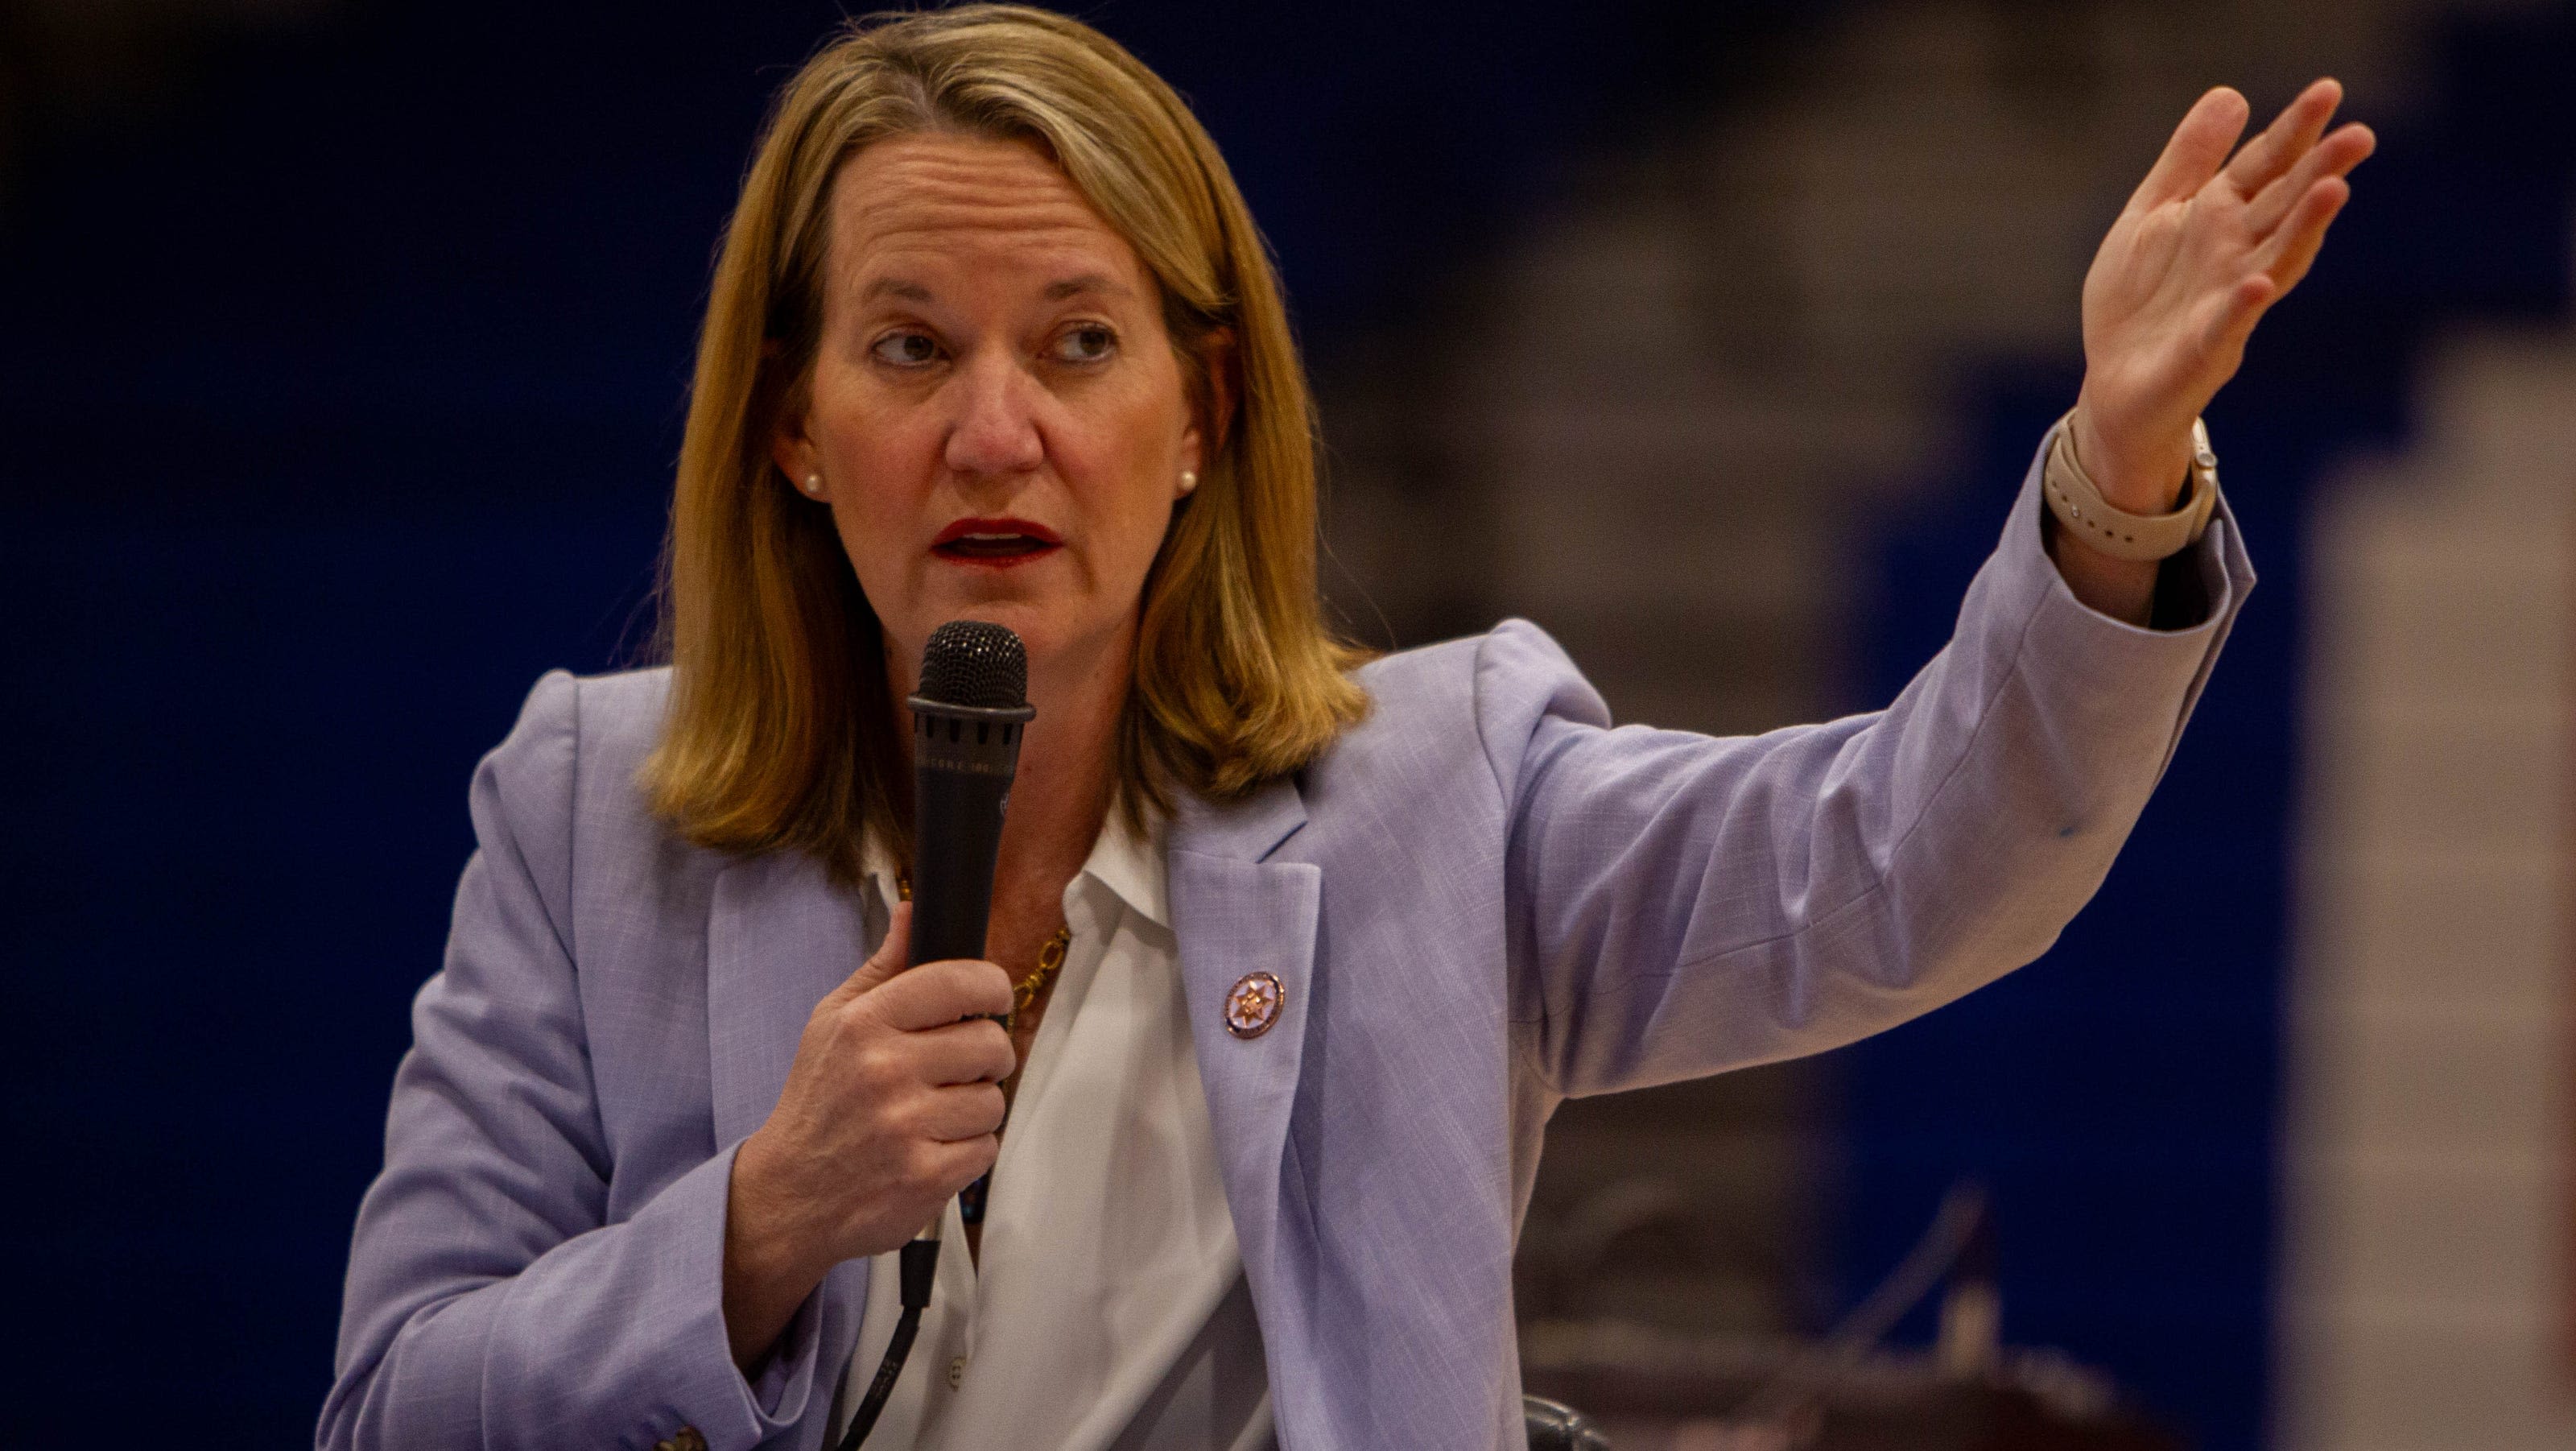 Arizona GOP report calls for Dem AG Kris Mayes to be impeached. She calls it a 'sham'